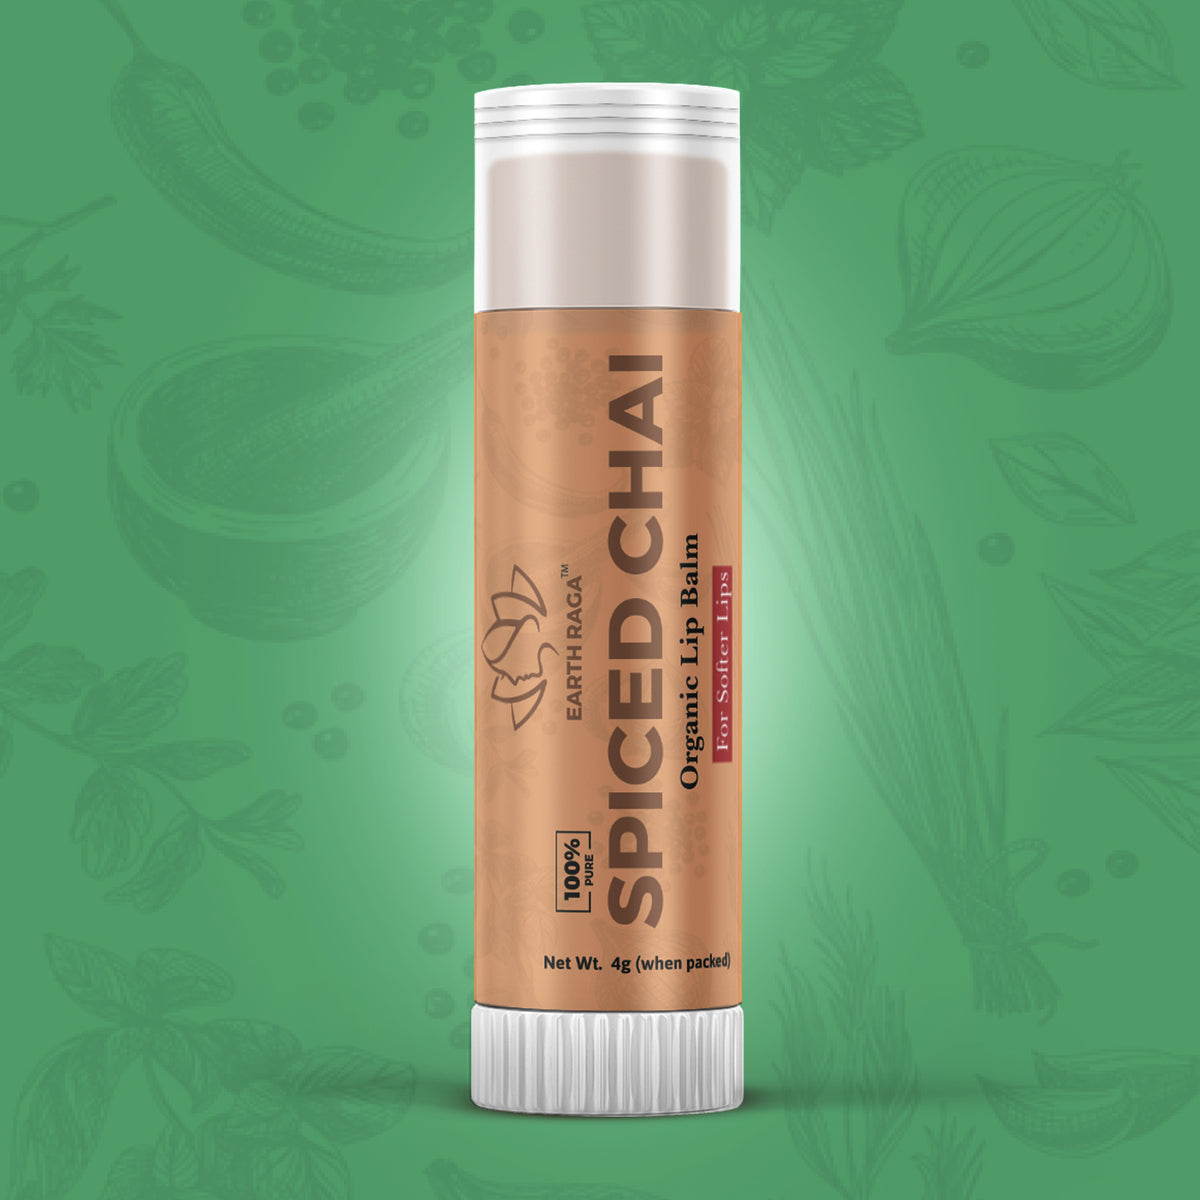 Spiced Chai Organic Lip Balm 4g | Locks Moisture In Lips | Soothes Chapped Lips | Heals Damaged Lips| Enriched With Antioxidants